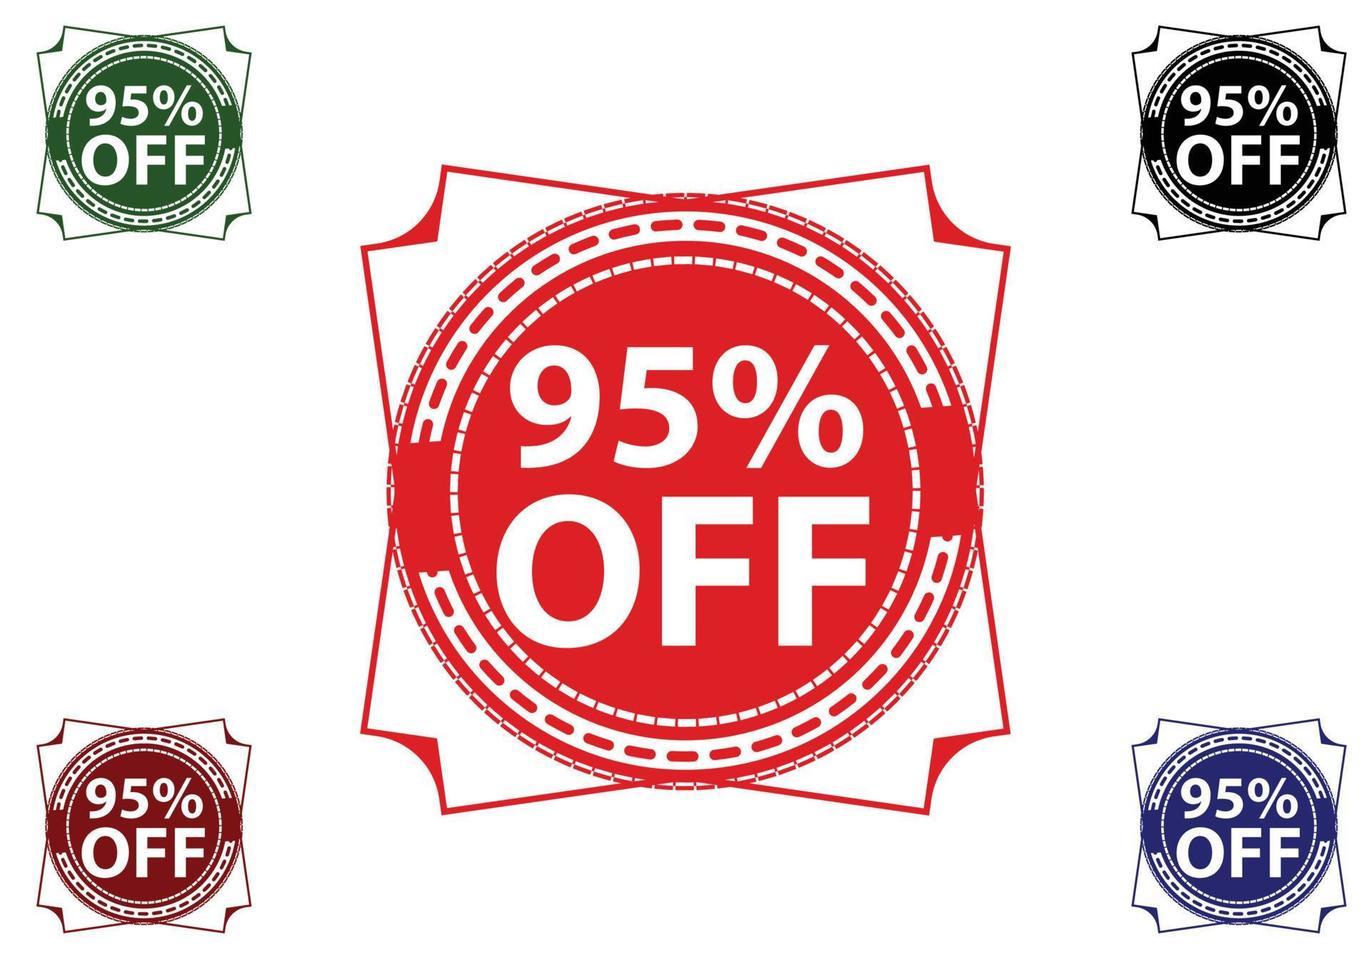 95 percent off new offer logo and icon design vector